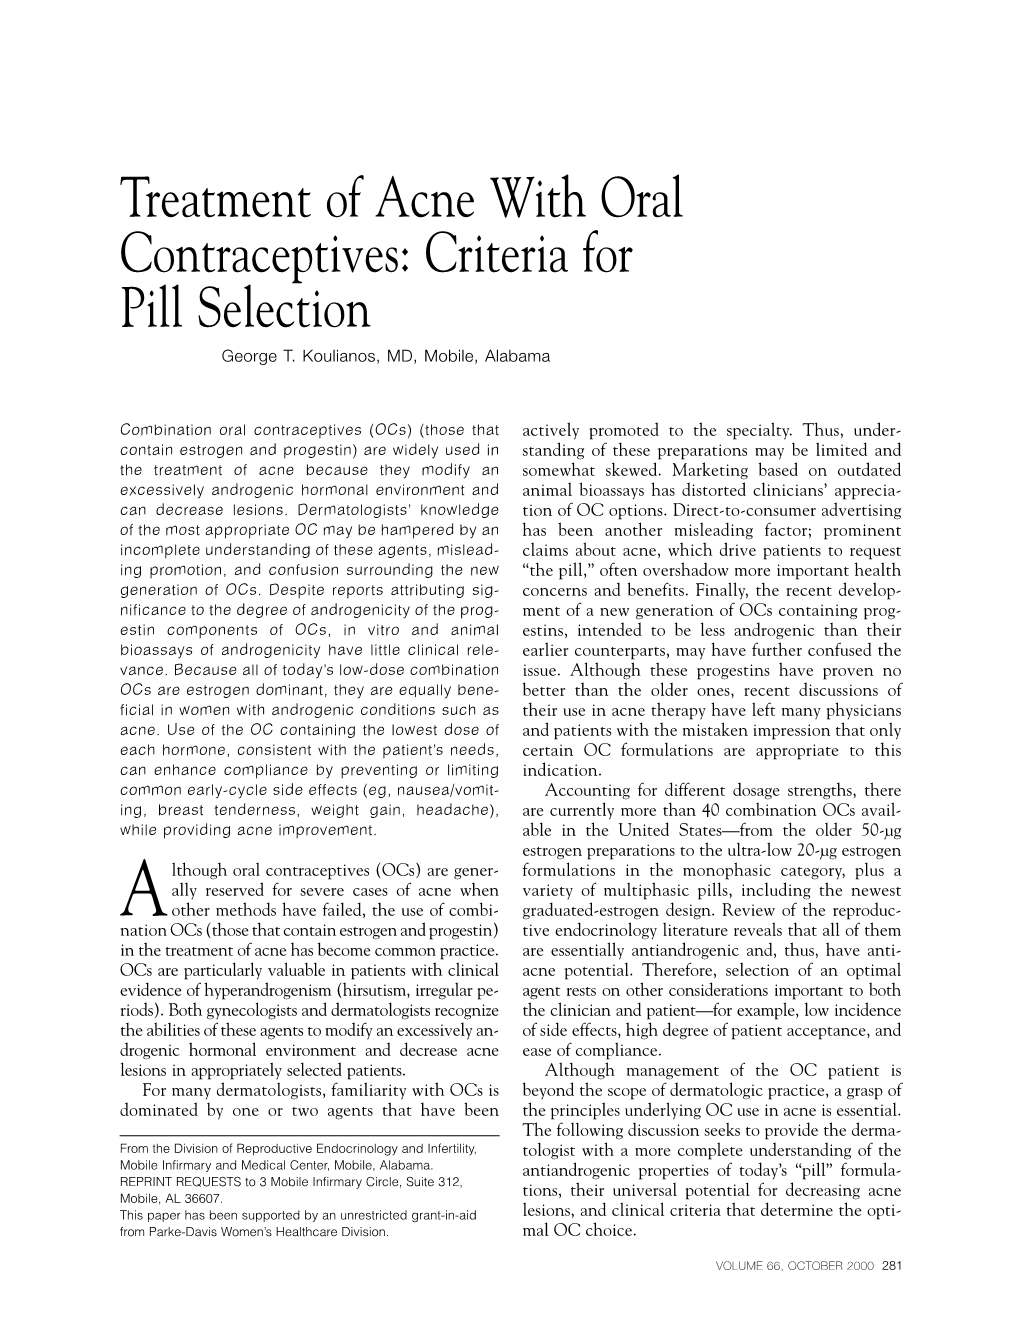 Treatment of Acne with Oral Contraceptives: Criteria for Pill Selection George T